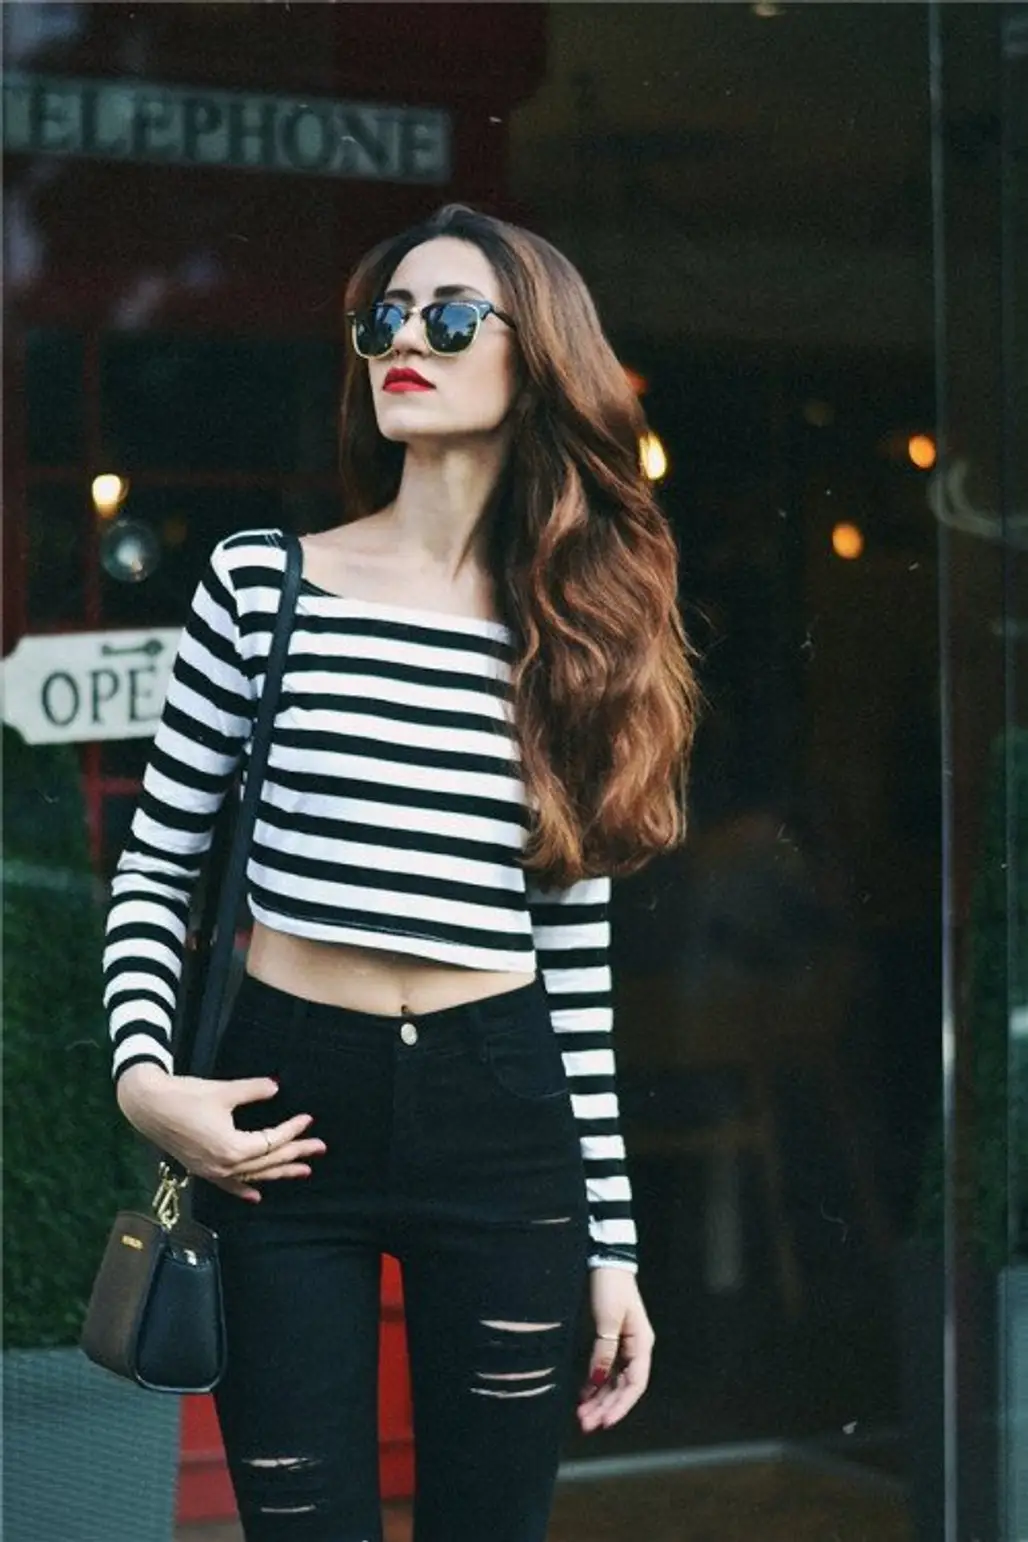 With a Striped Crop Top